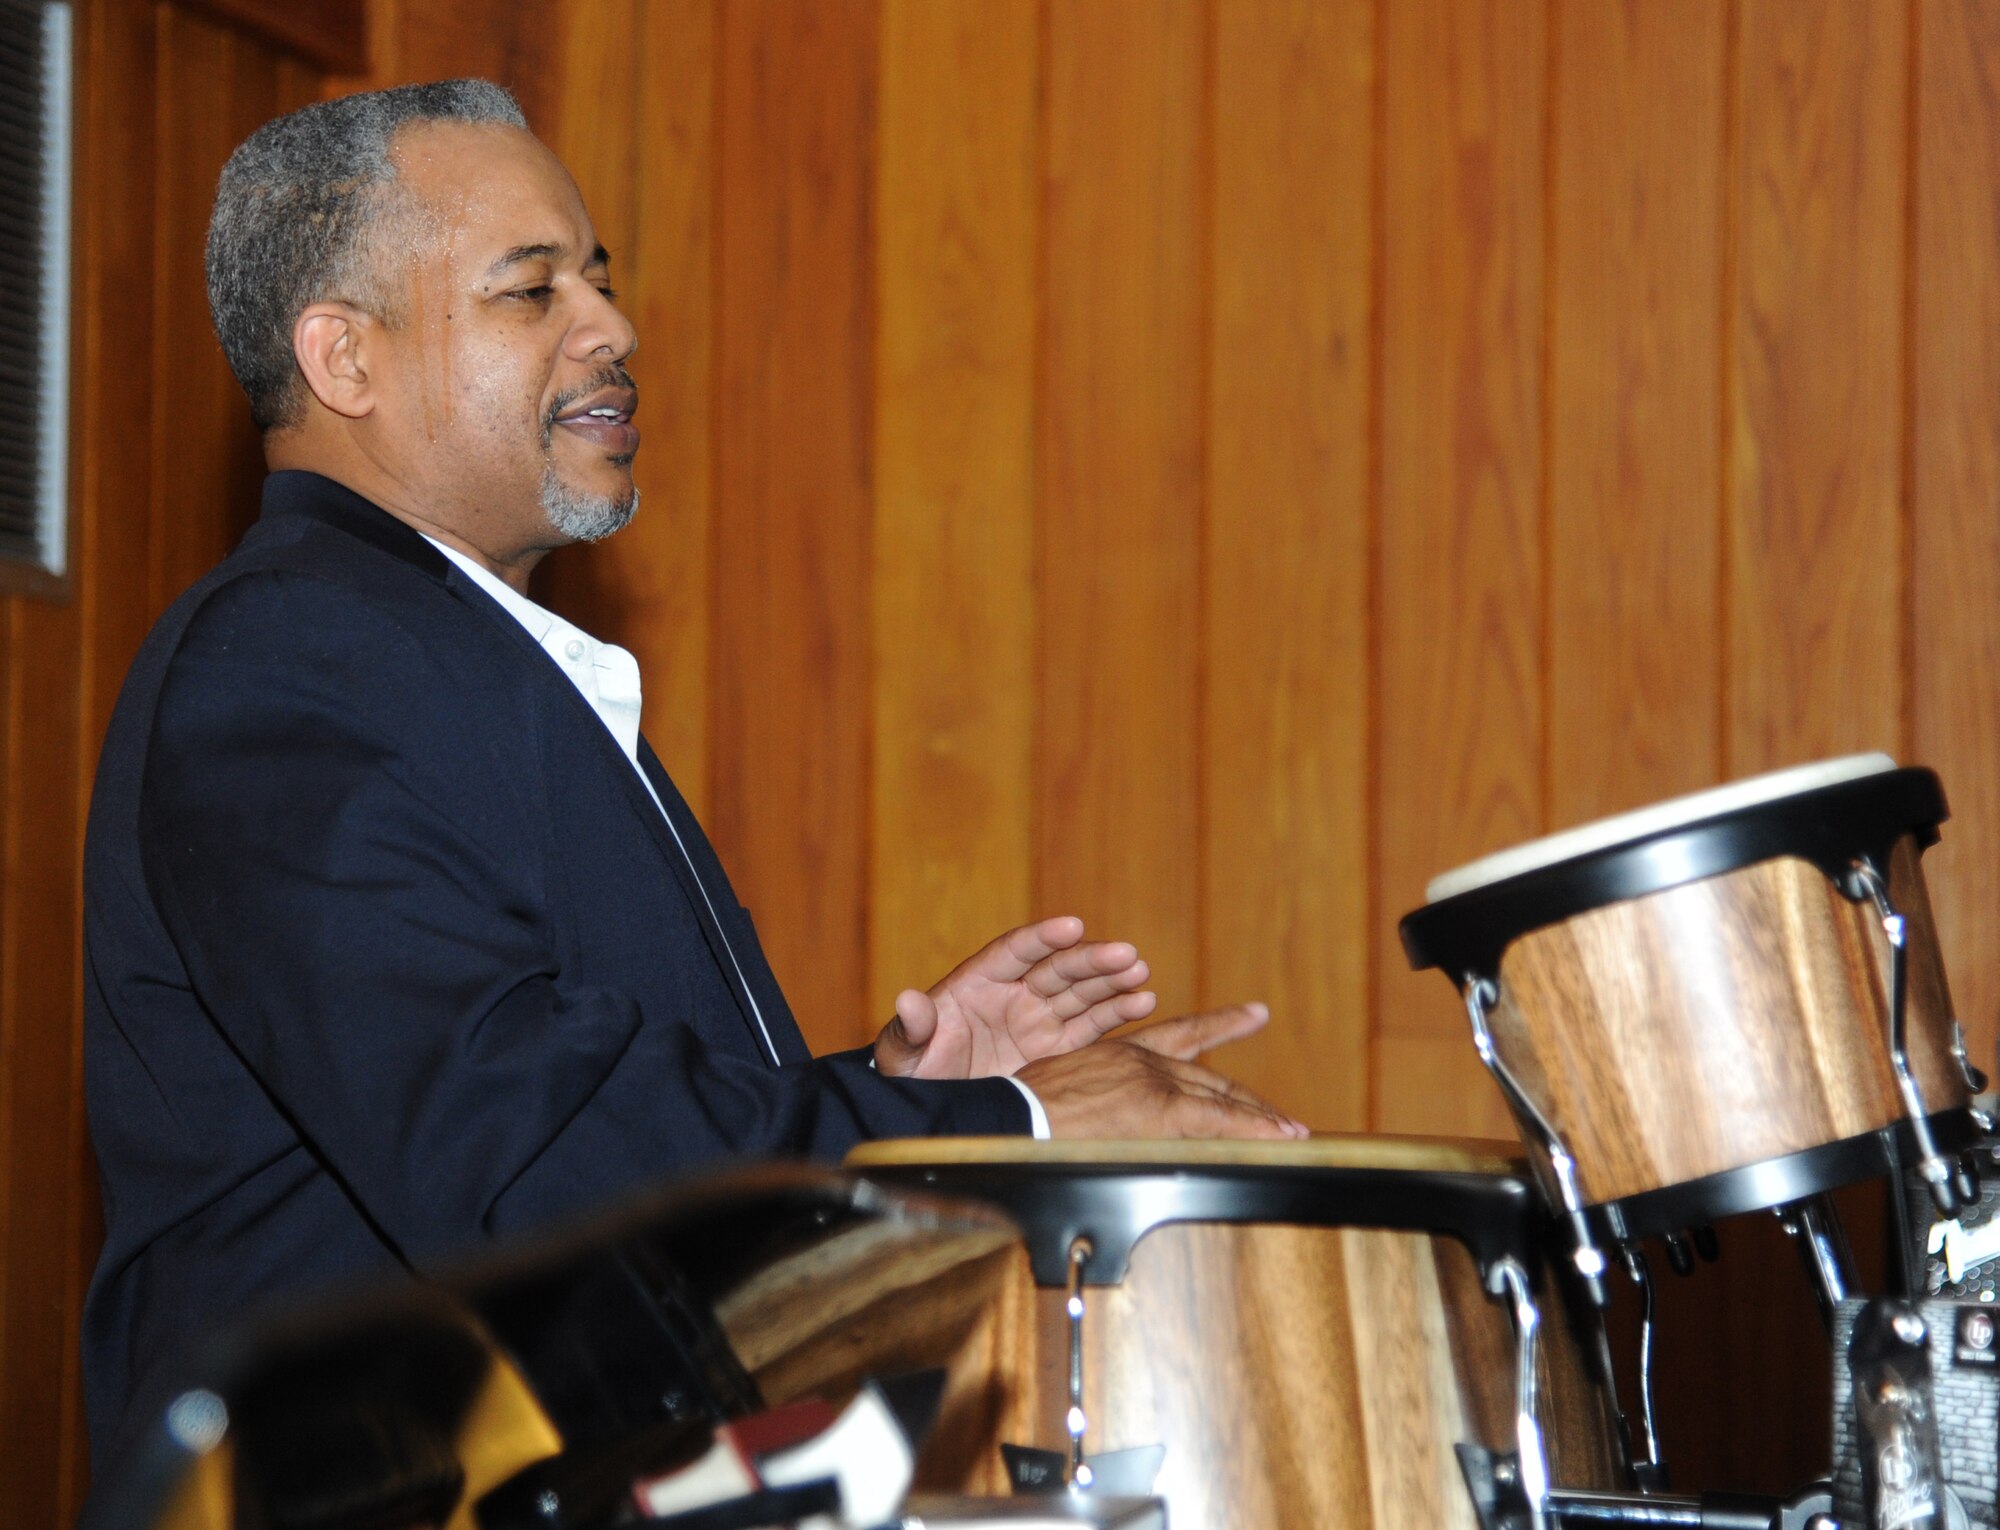 Retired Chief Master Sgt. Curtis Jennings plays bongos for the Keesler  Gospel Choir during the 2015 Gospel Concert Jan. 31, 2015, at the Triangle Chapel, Keesler Air Force Base, Miss.   The African American Heritage Committee hosted the praise and worship service to celebrate Black History Month. (U.S. Air Force photo by Kemberly Groue)